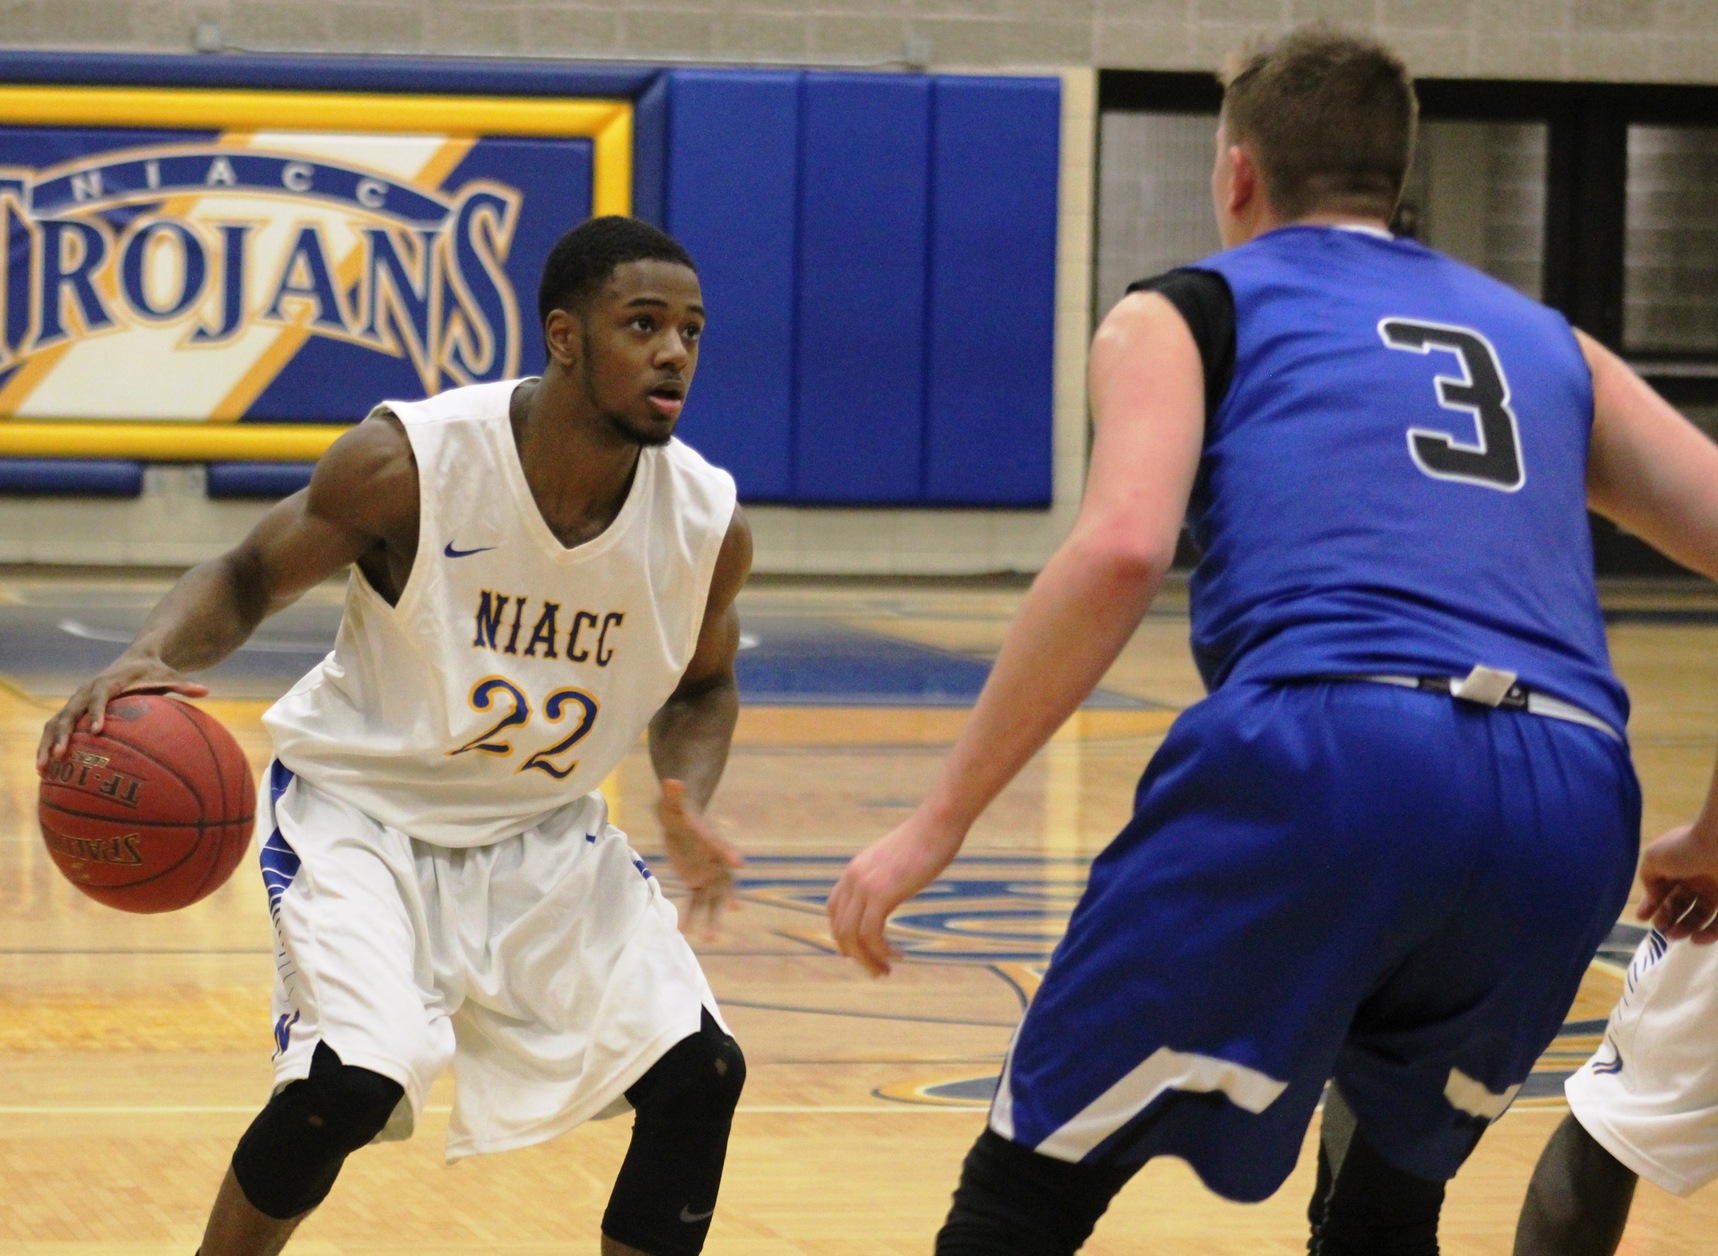 NIACC's Josh White looks to drive to the basket against DCTC.